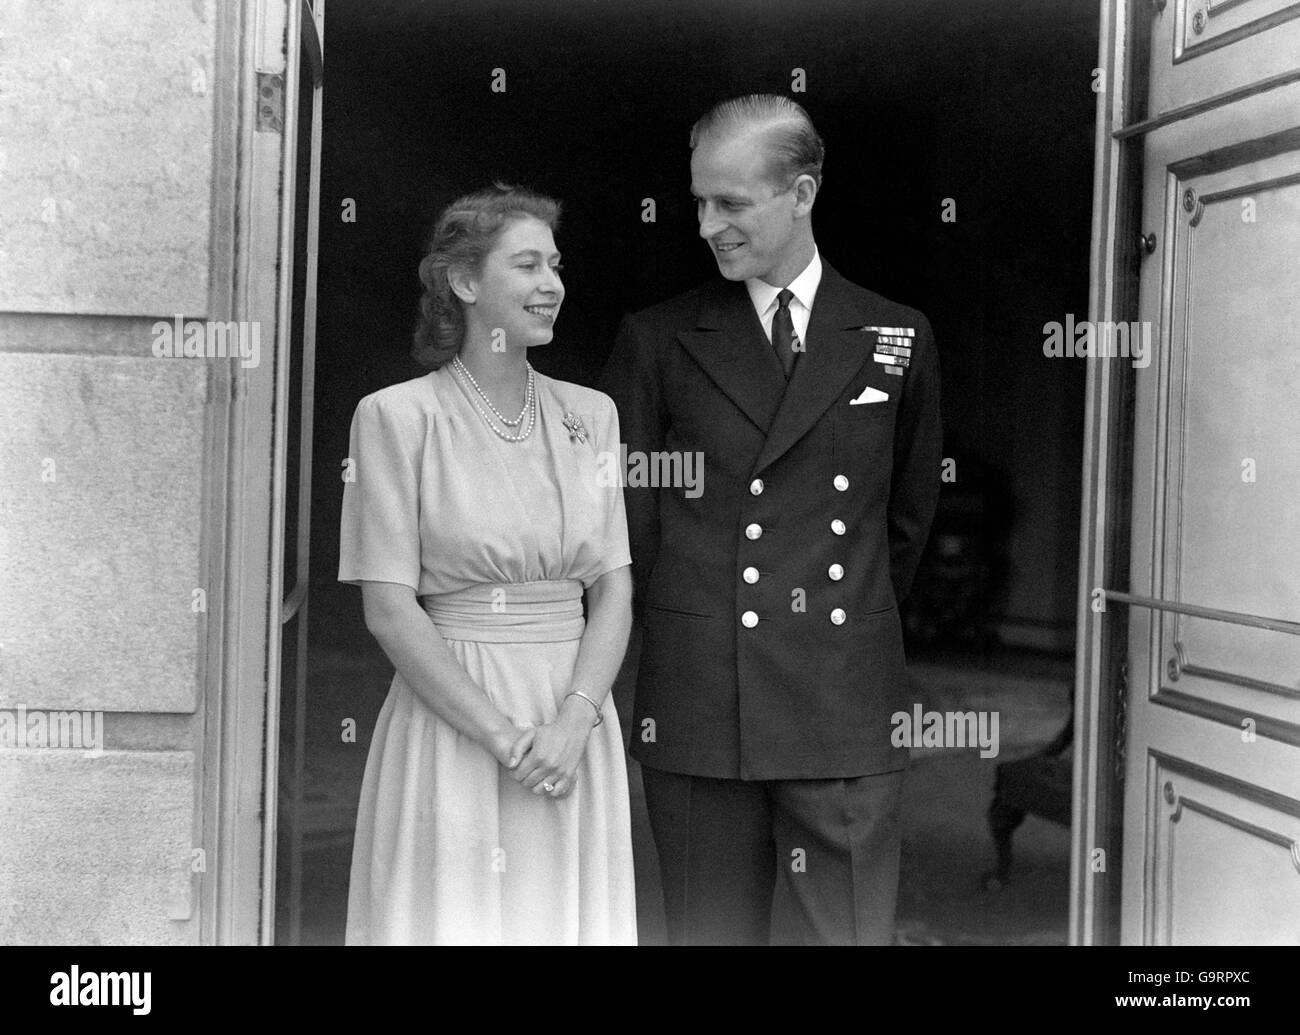 Smiling happily, the Princess and her fiance Lieut. Philip Mountbatten, at Buckingham Palace. Princess Elizabeth's engagement ring is plainly visible Stock Photo